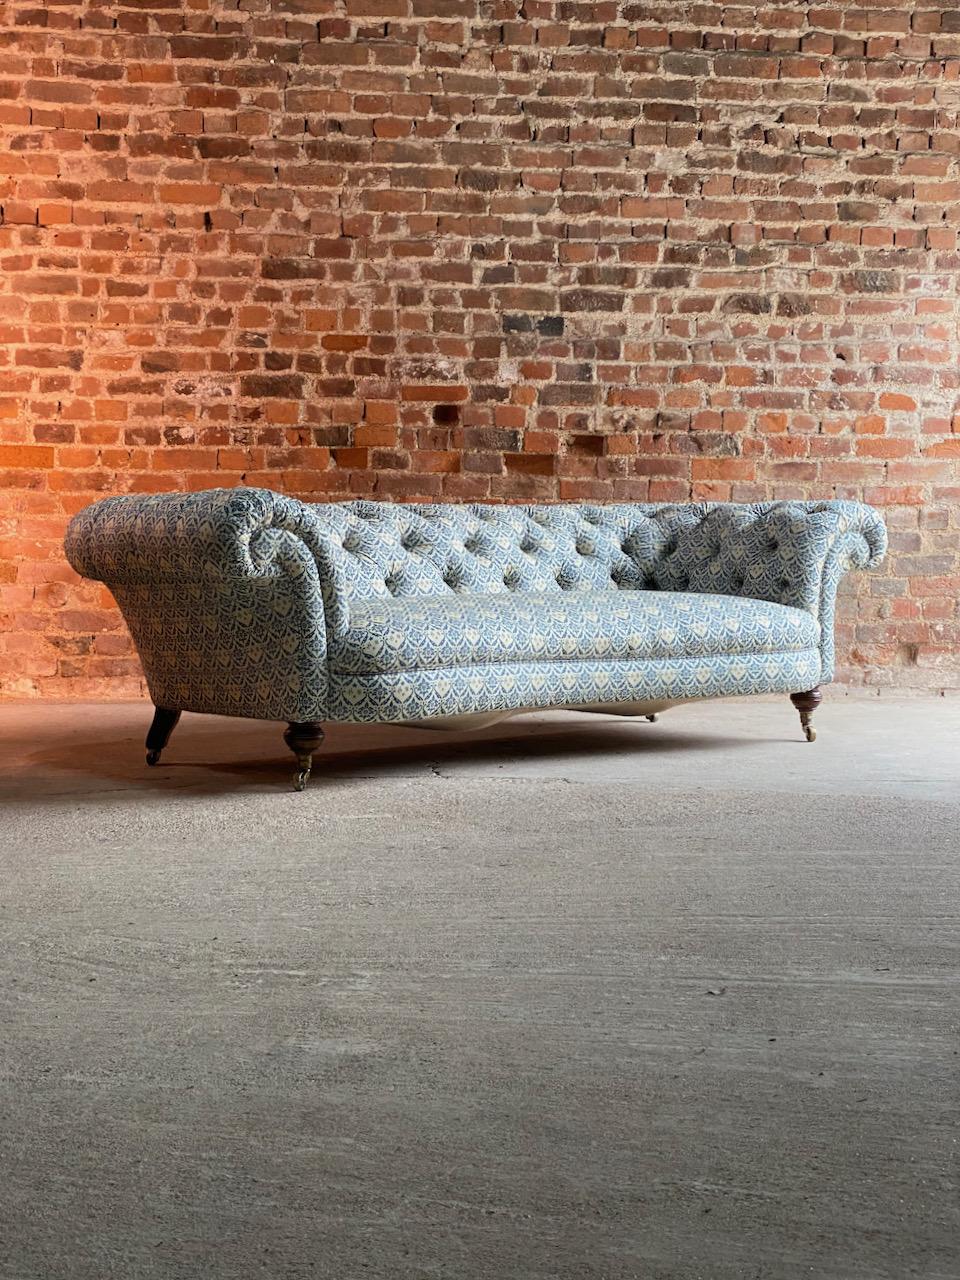 Howard and Sons Chesterfield sofa, 19th century, circa 1850

Magnificent large and imposing 19th century Howard and Sons Country House Chesterfield button backed three-seat sofa England circa 1850, serpentine fronted with exceptional size and